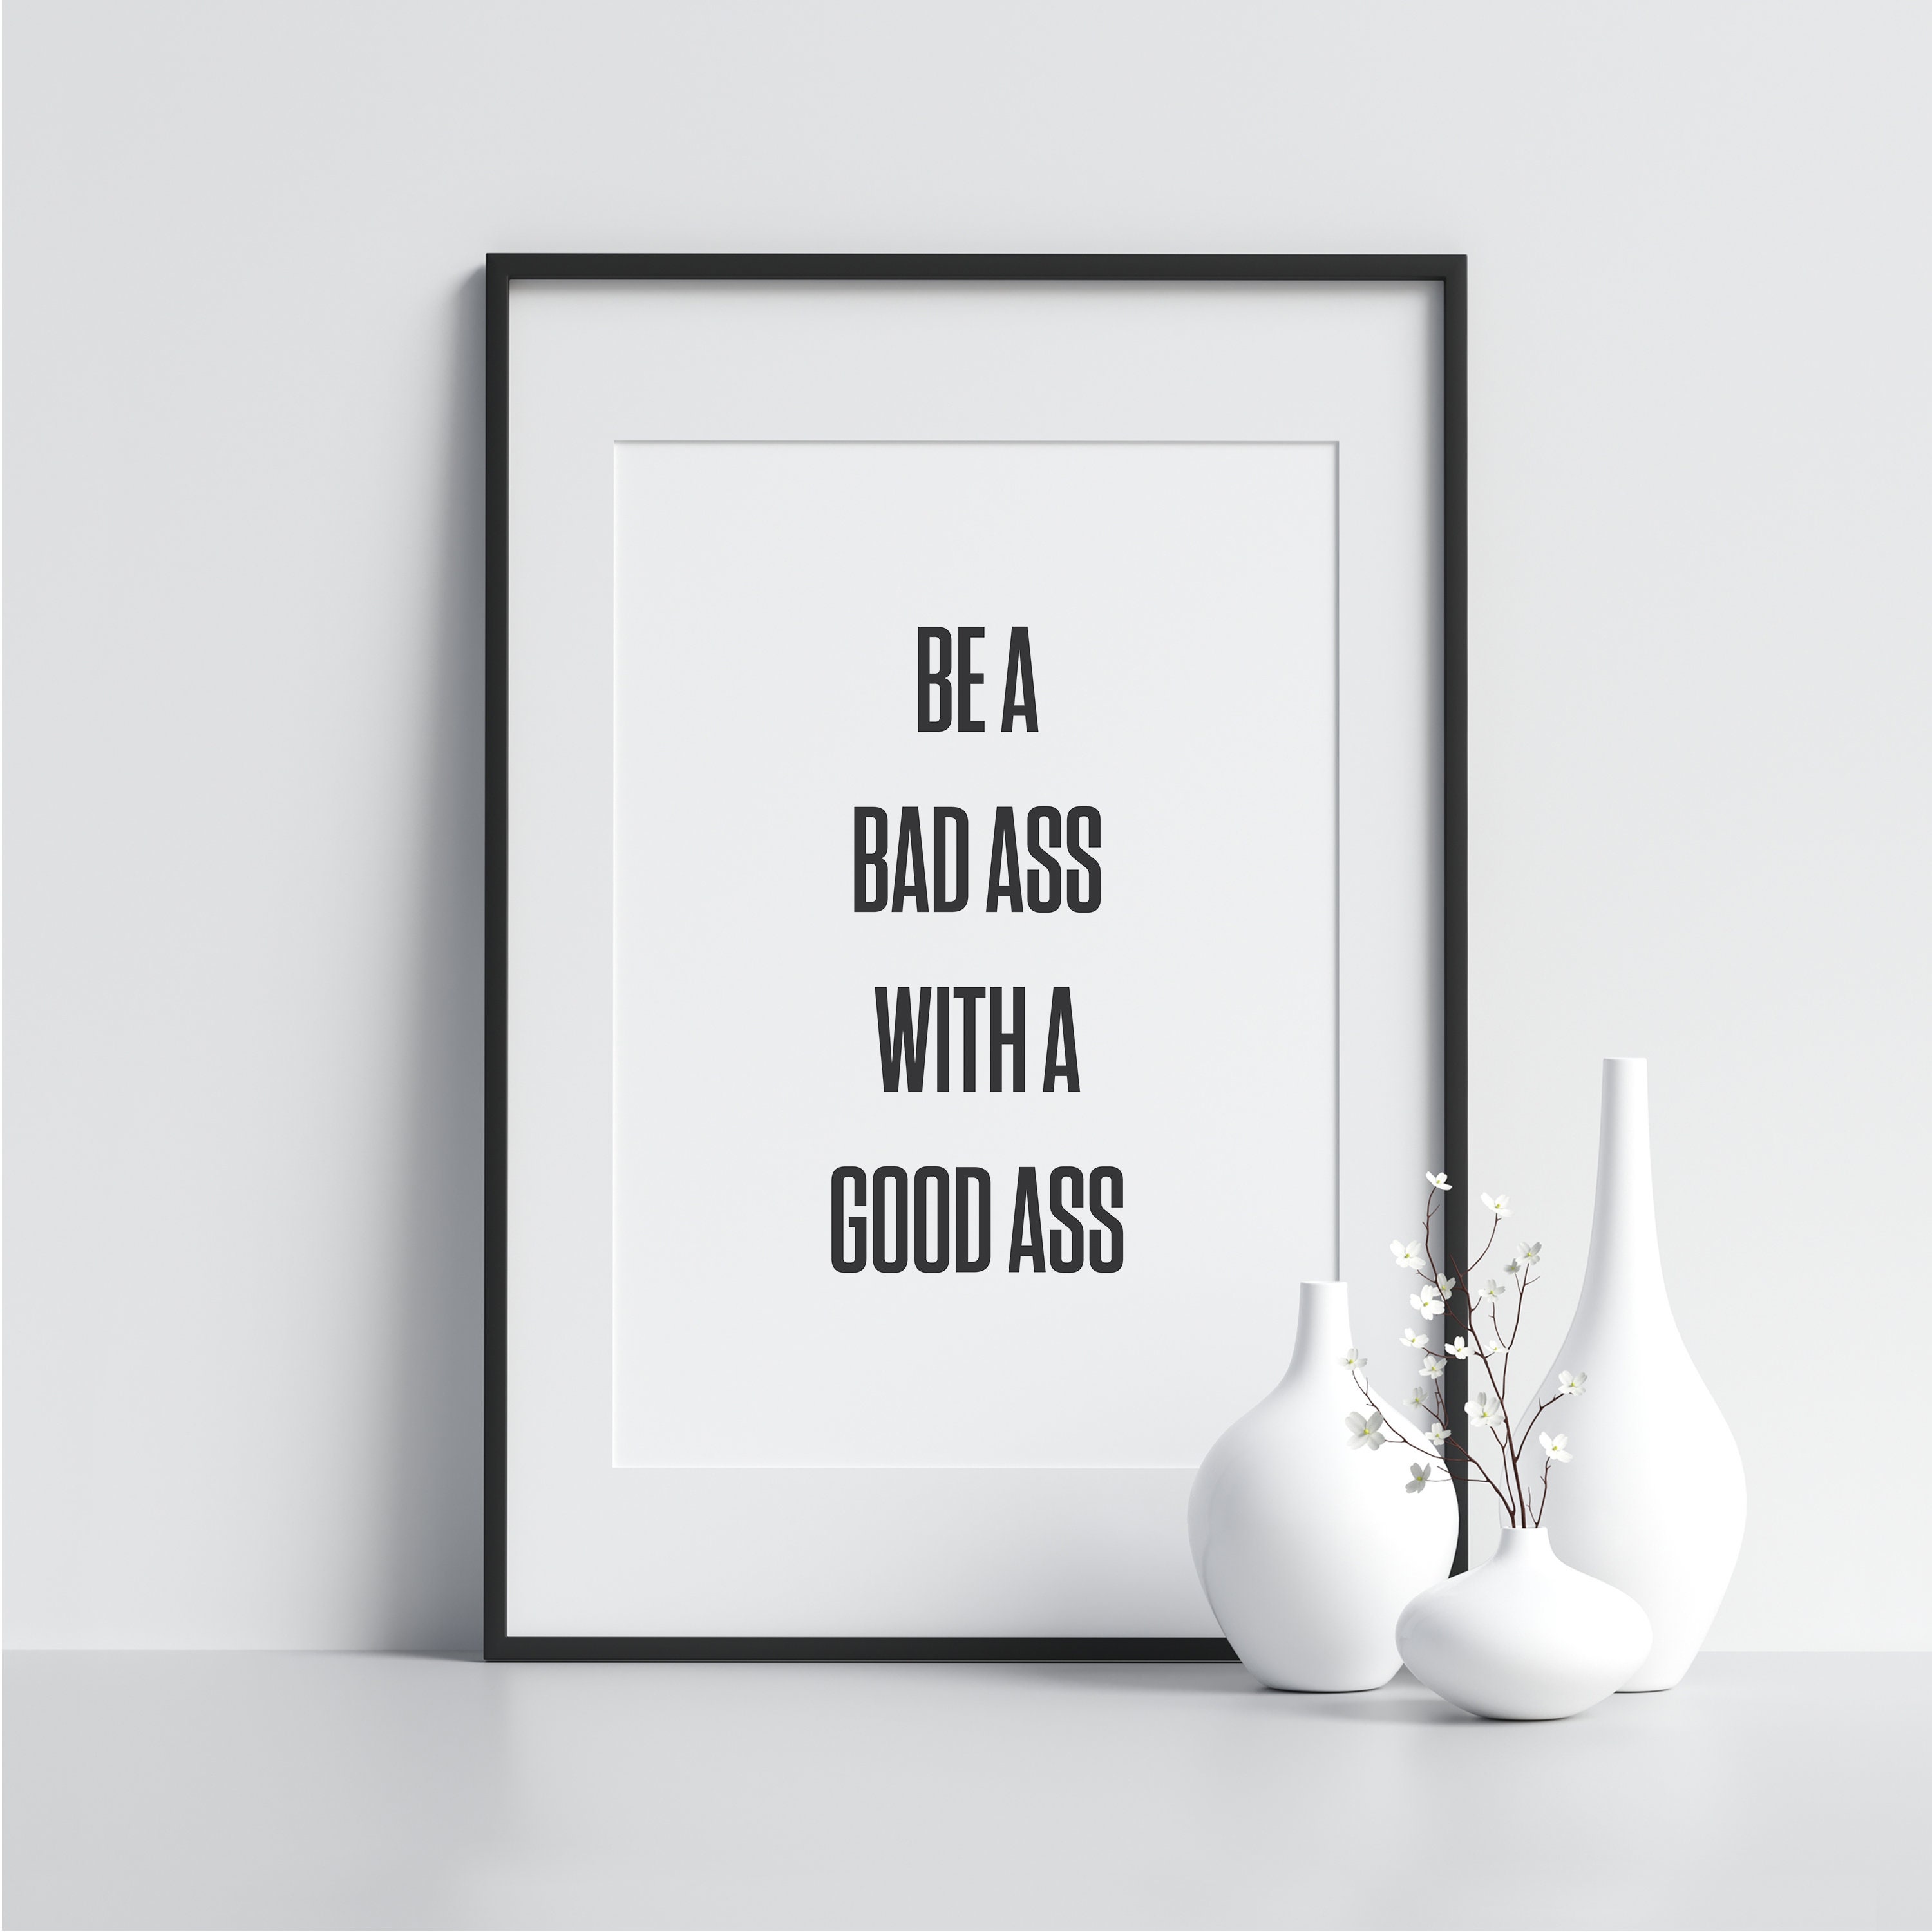 Gifts for Women Motivational Decor Be a Bad Ass With a Good Ass Prints for Her Typography Wall Art Minimalist Print Motivational Quote